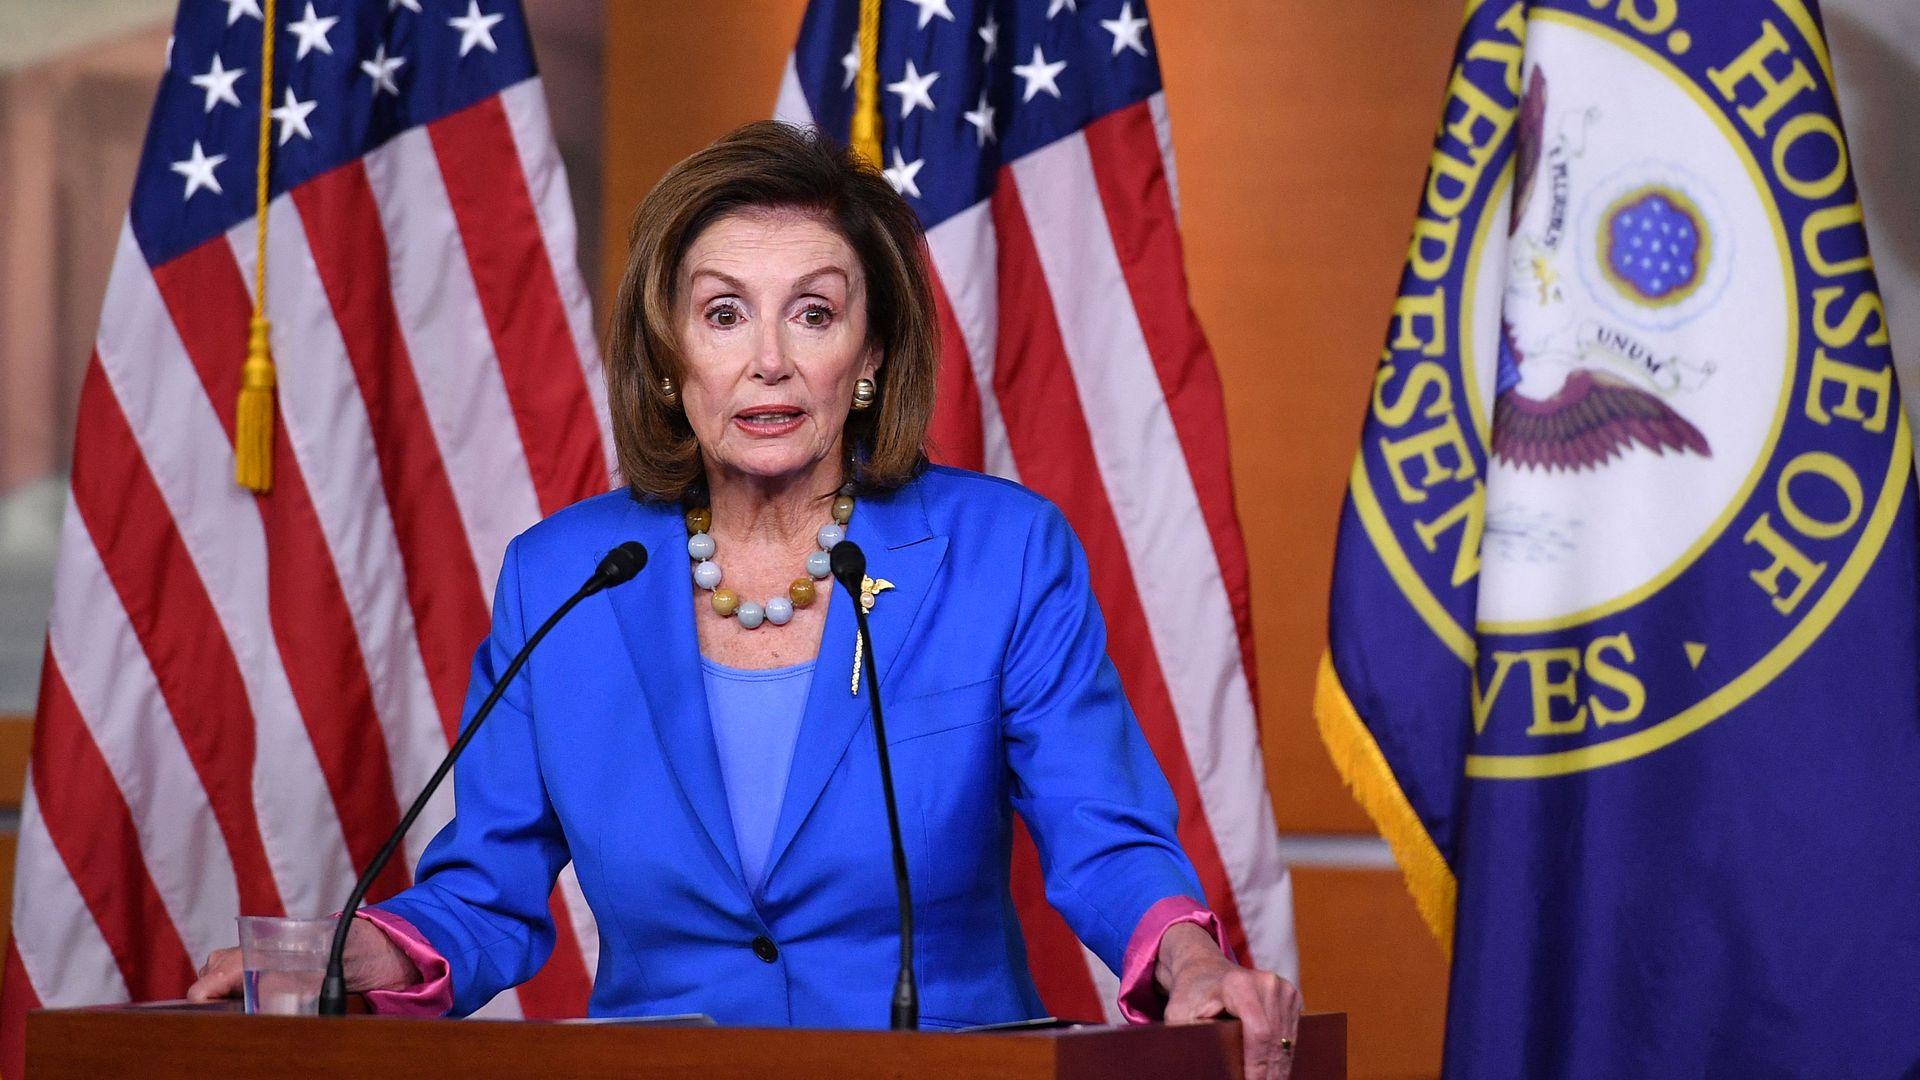 Pelosi Forges Ahead With Bipartisan Infrastructure Vote Despite Progressive Backlash